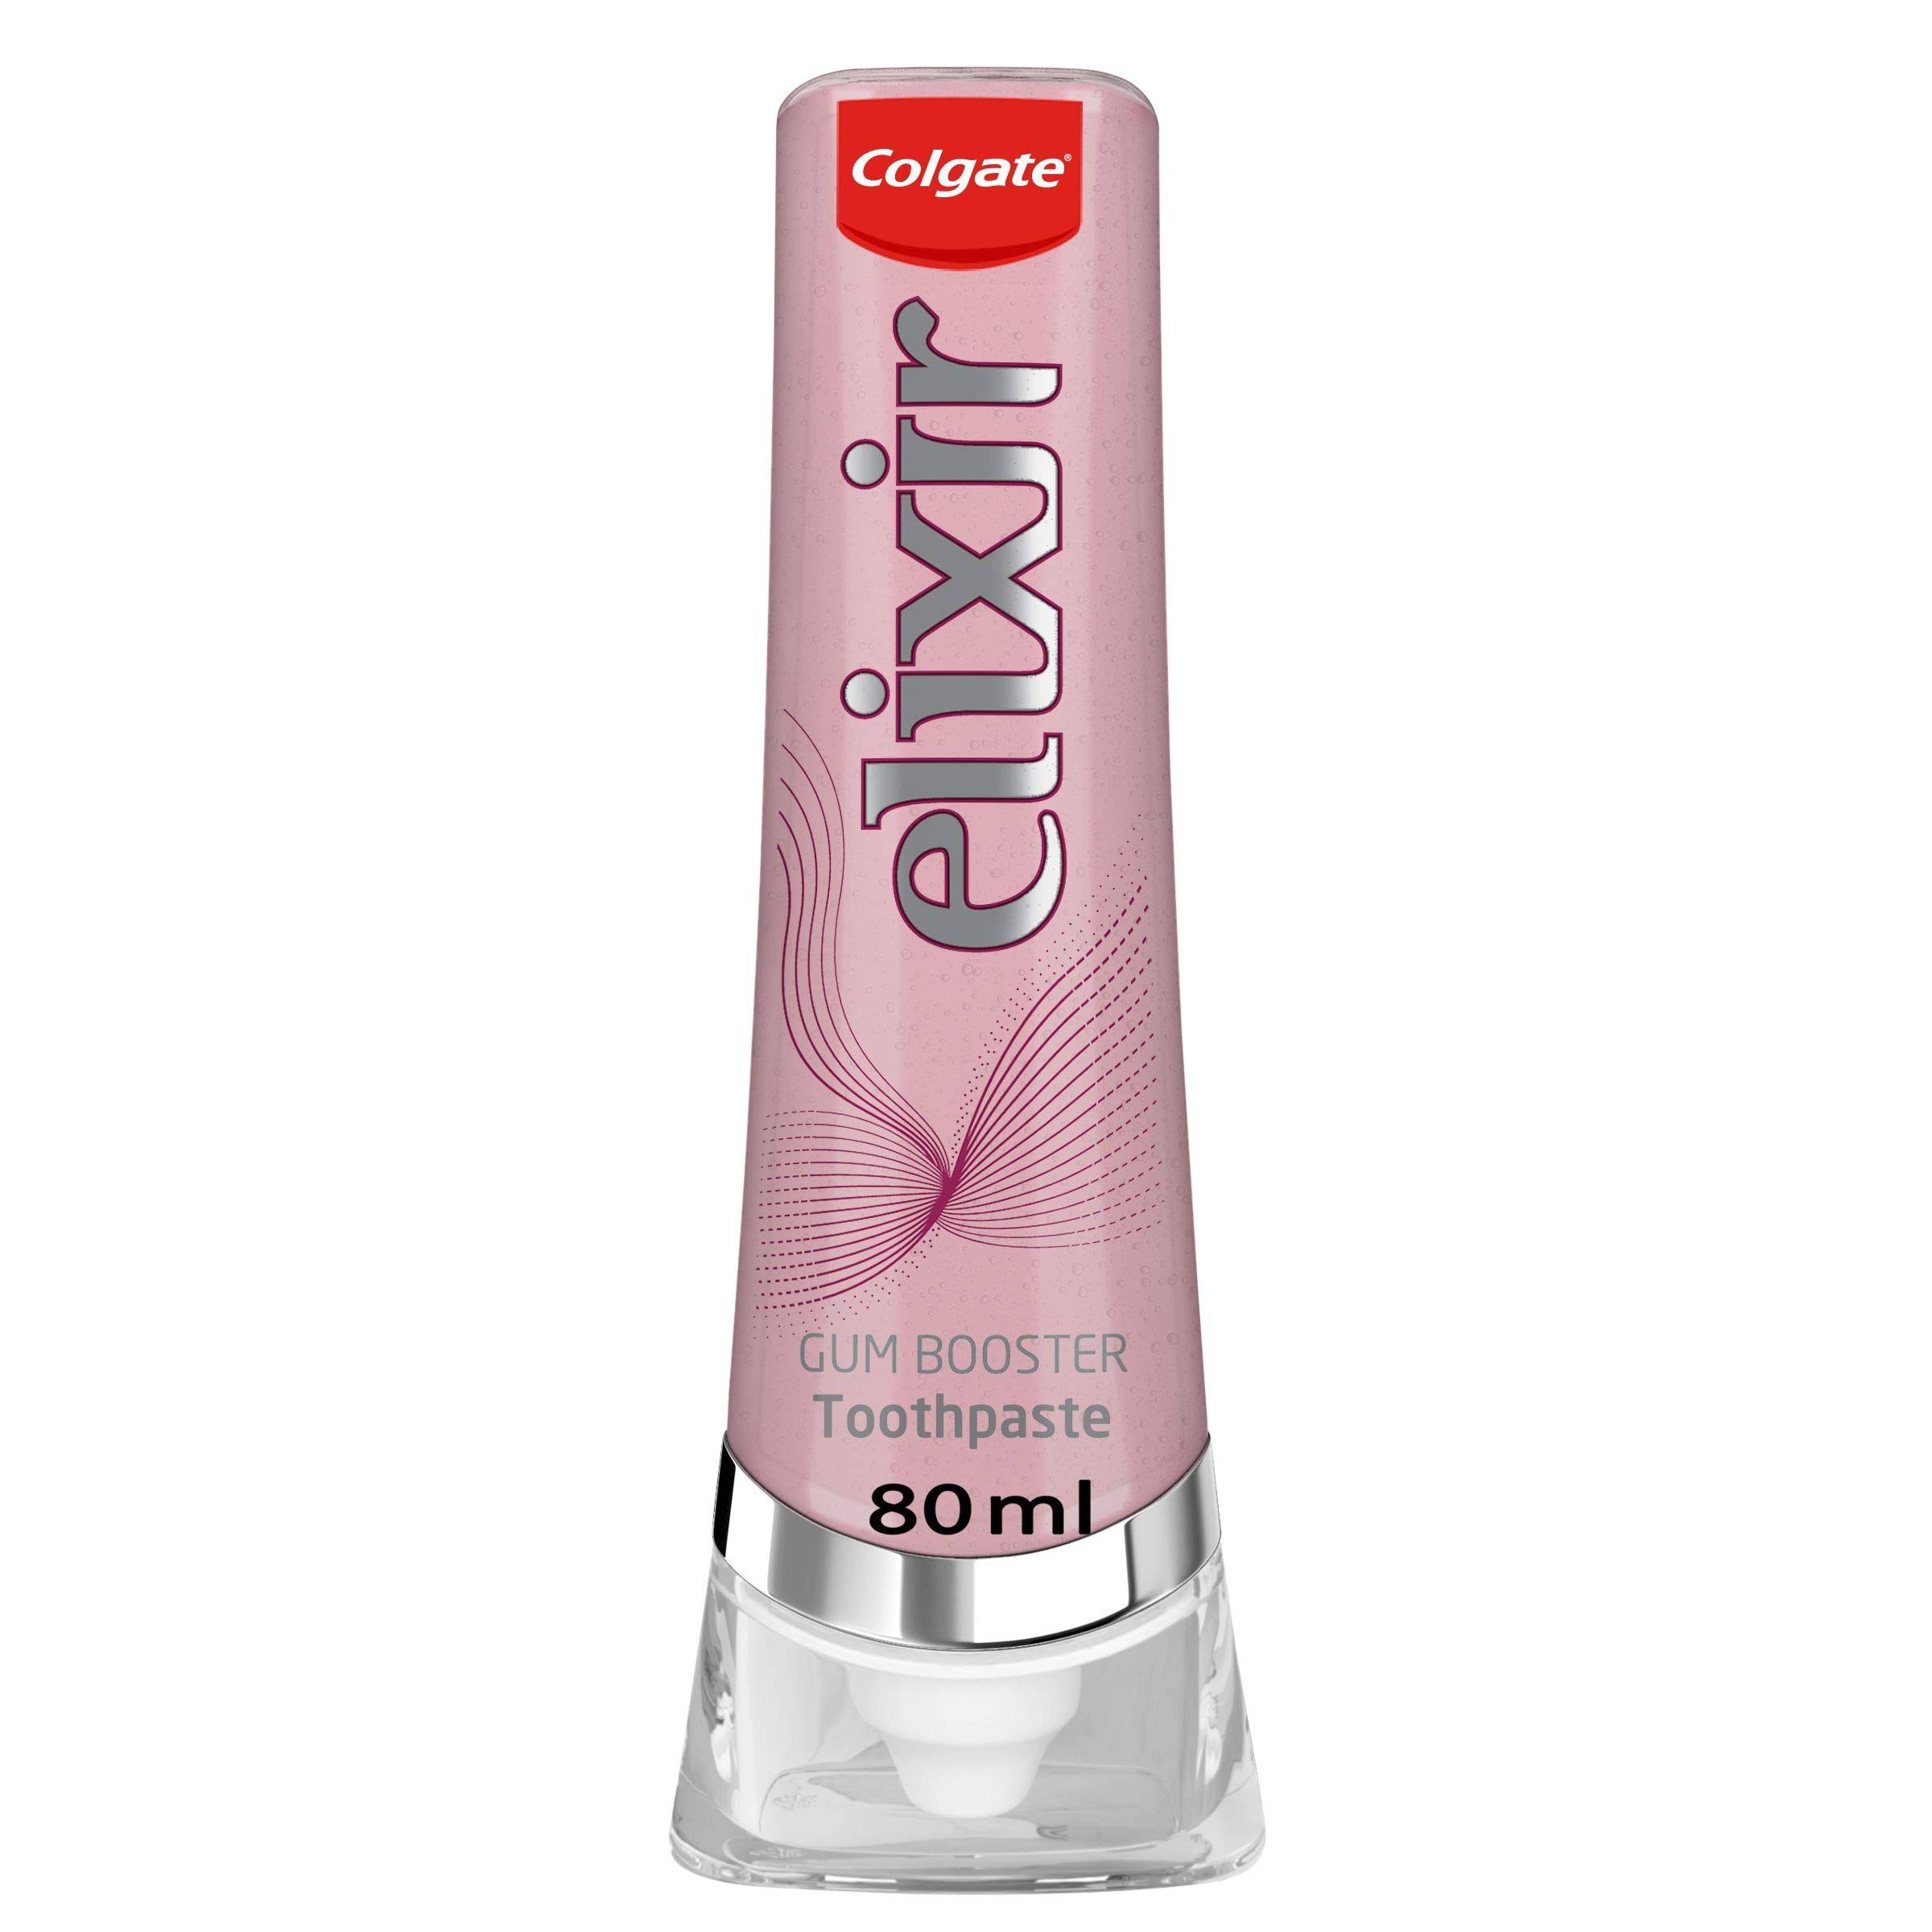 Colgate Elixir Gum Booster Toothpaste with Hyaluronic Acid 80ml